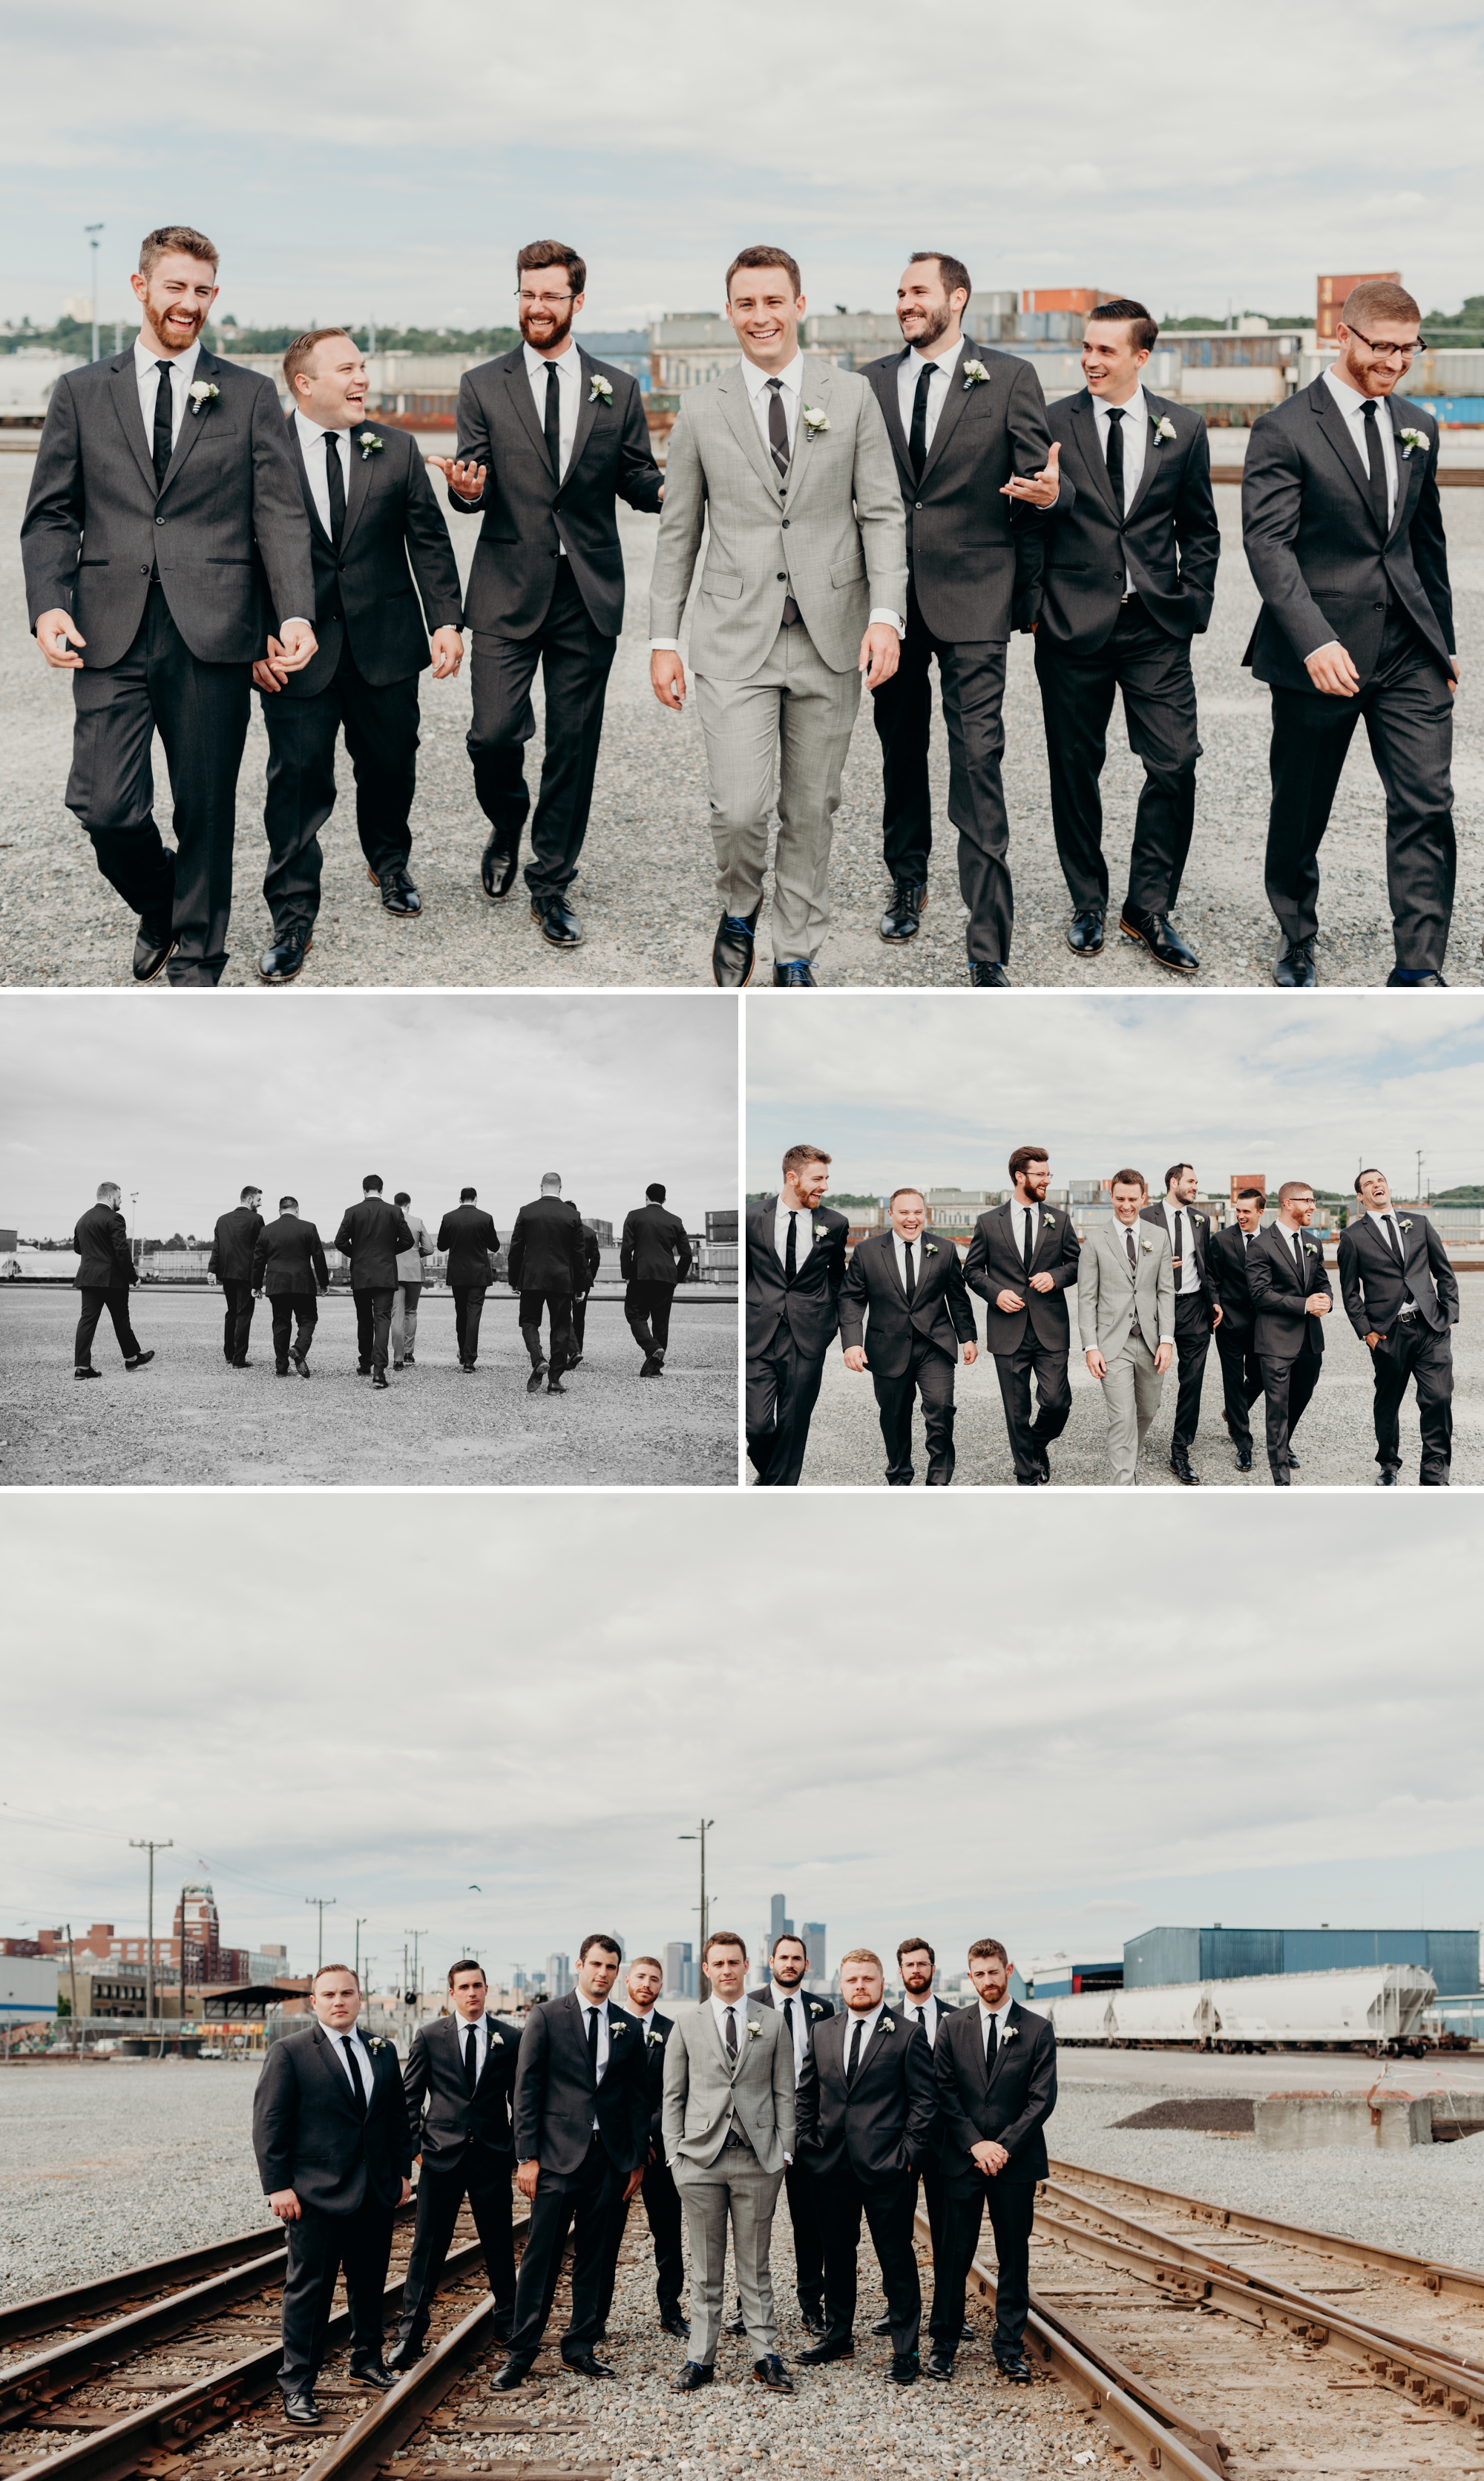 The groom's men being fly. By Sodo Park wedding photographer Briana Morrison.